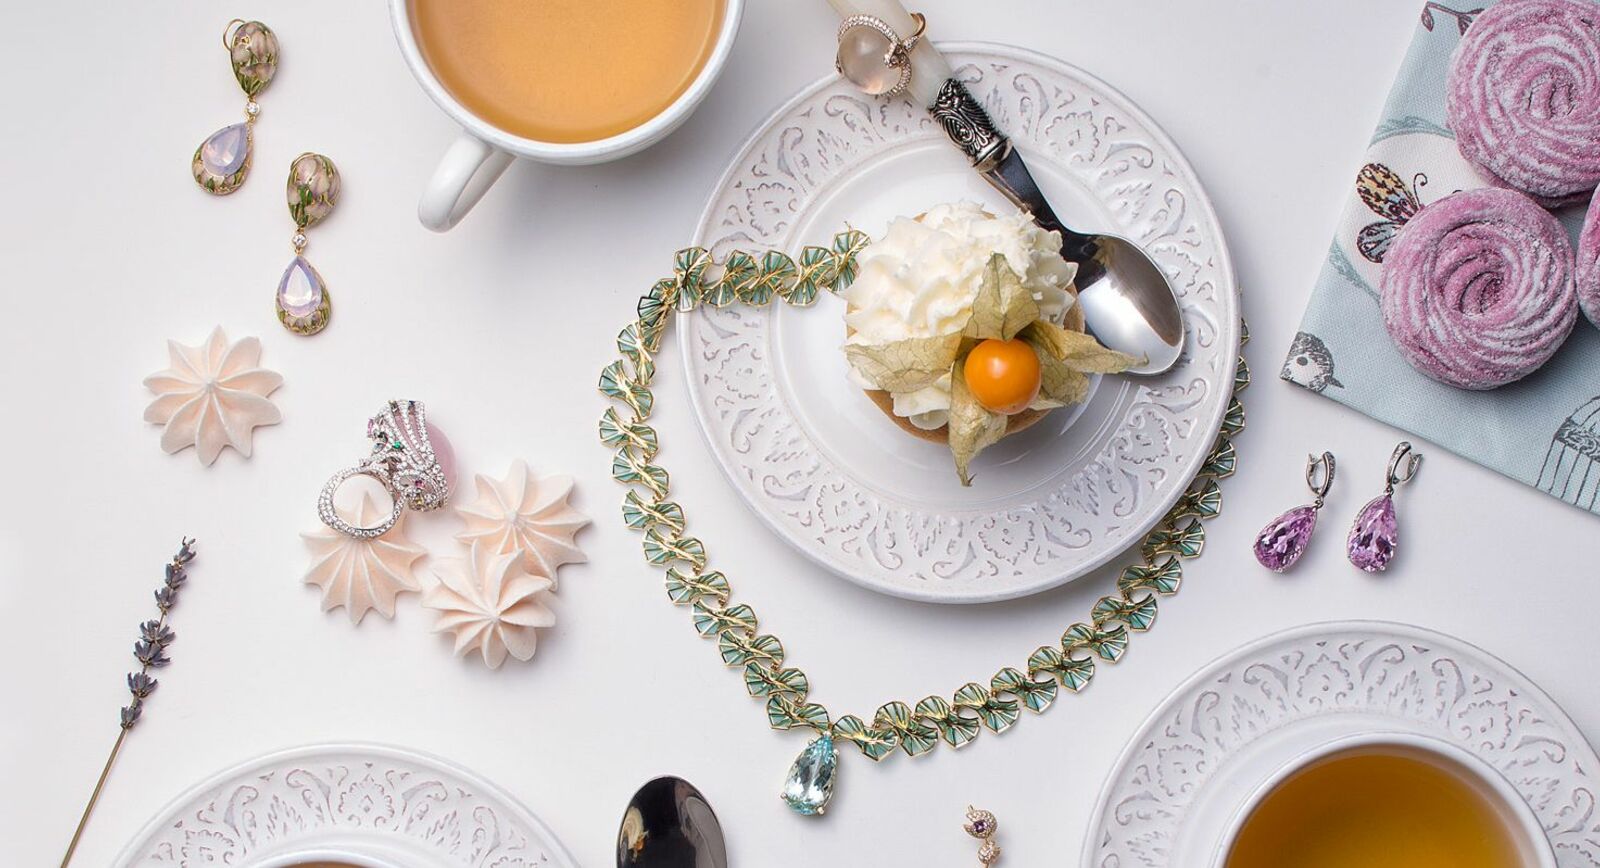 Jewellery Editorial: Bejewelled Tea Party – Part 1